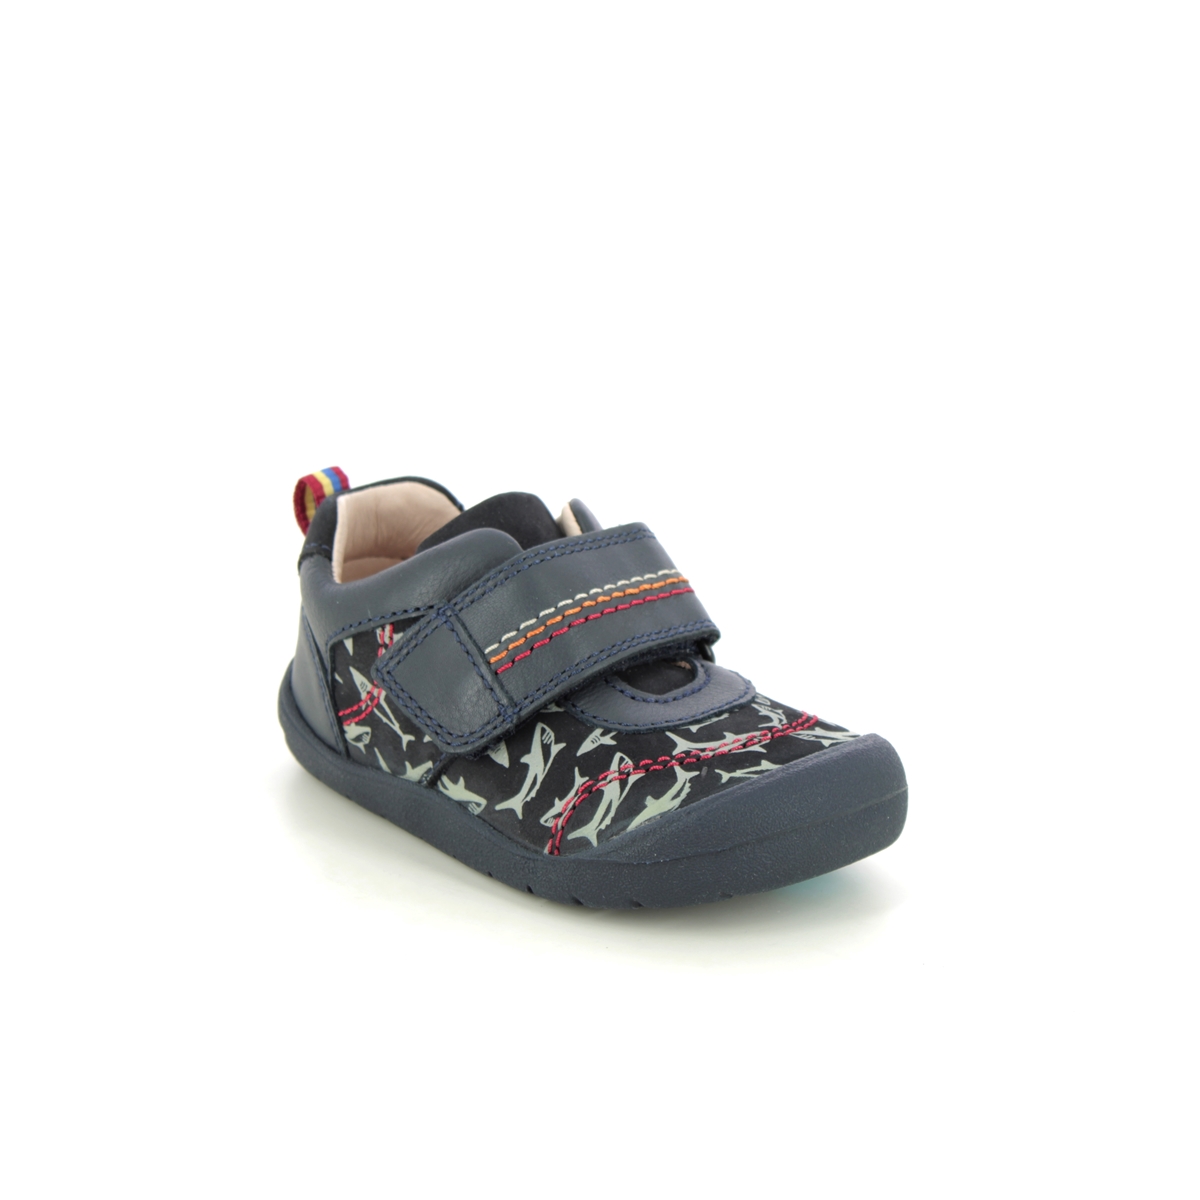 Start Rite - Jaws In Navy Nubuck 0782-97G In Size 4 In Plain Navy Nubuck Boys First And Toddler Shoes  In Navy Nubuck For kids